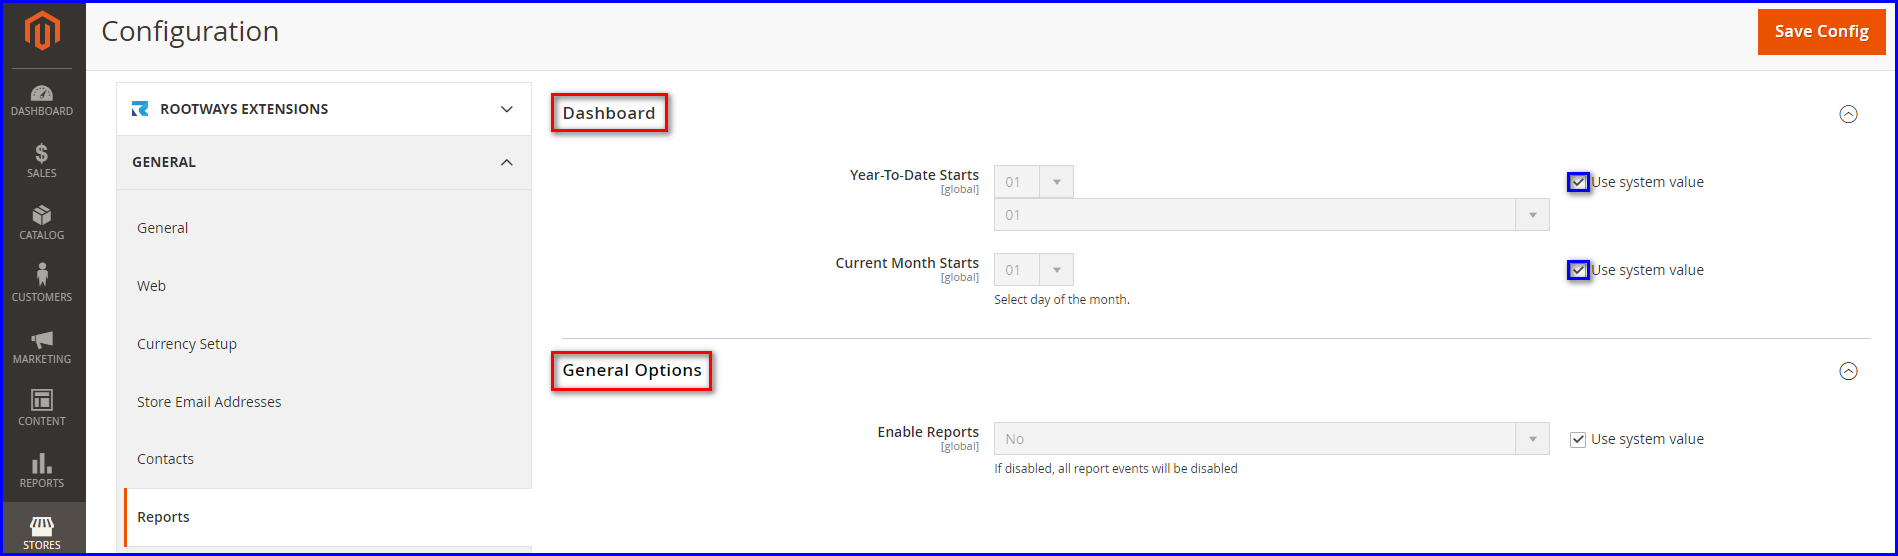 How to Disable Reports